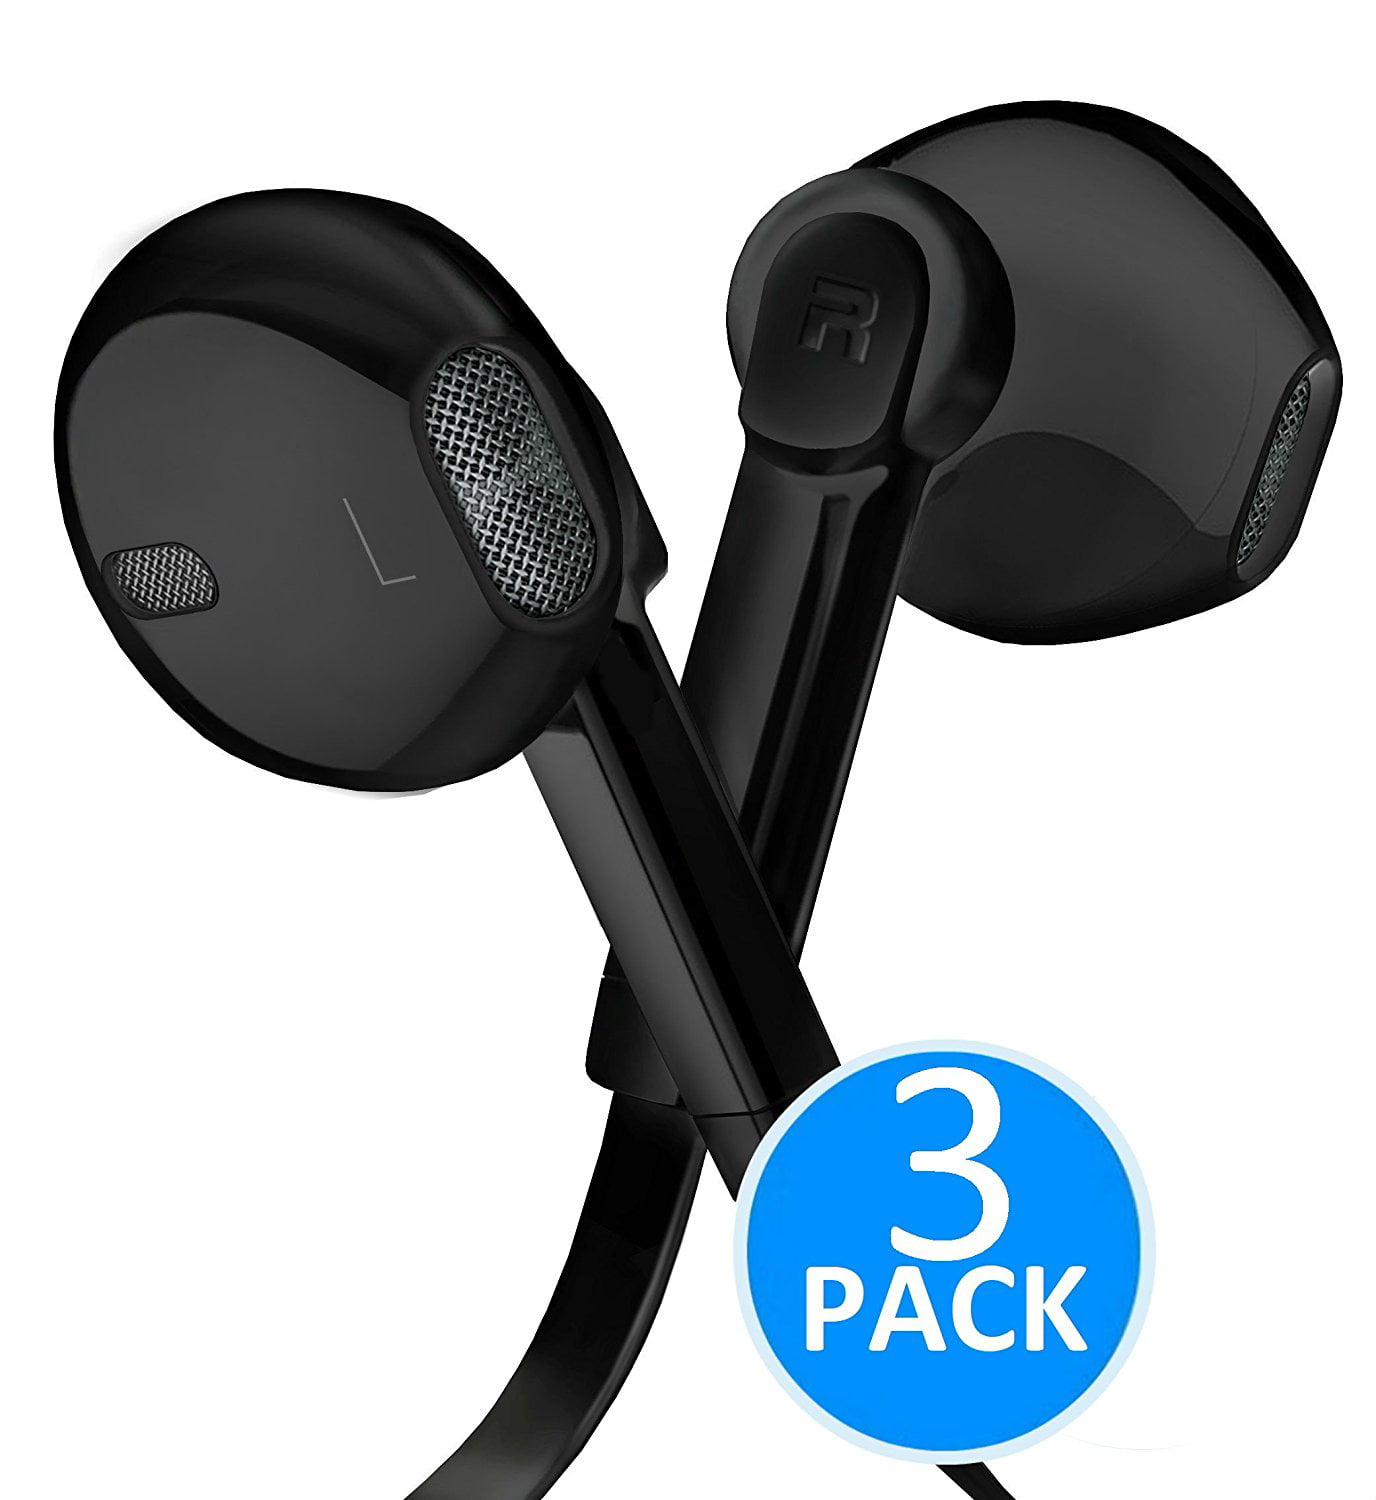 Headphones - In-Ear HD Stereo Noise Cancelling Sweatproof Sport Earphones Earbuds Flat Wired with Apple iOS Samsung and Android Compatible Microphone and Remote (Black 3-Pack)